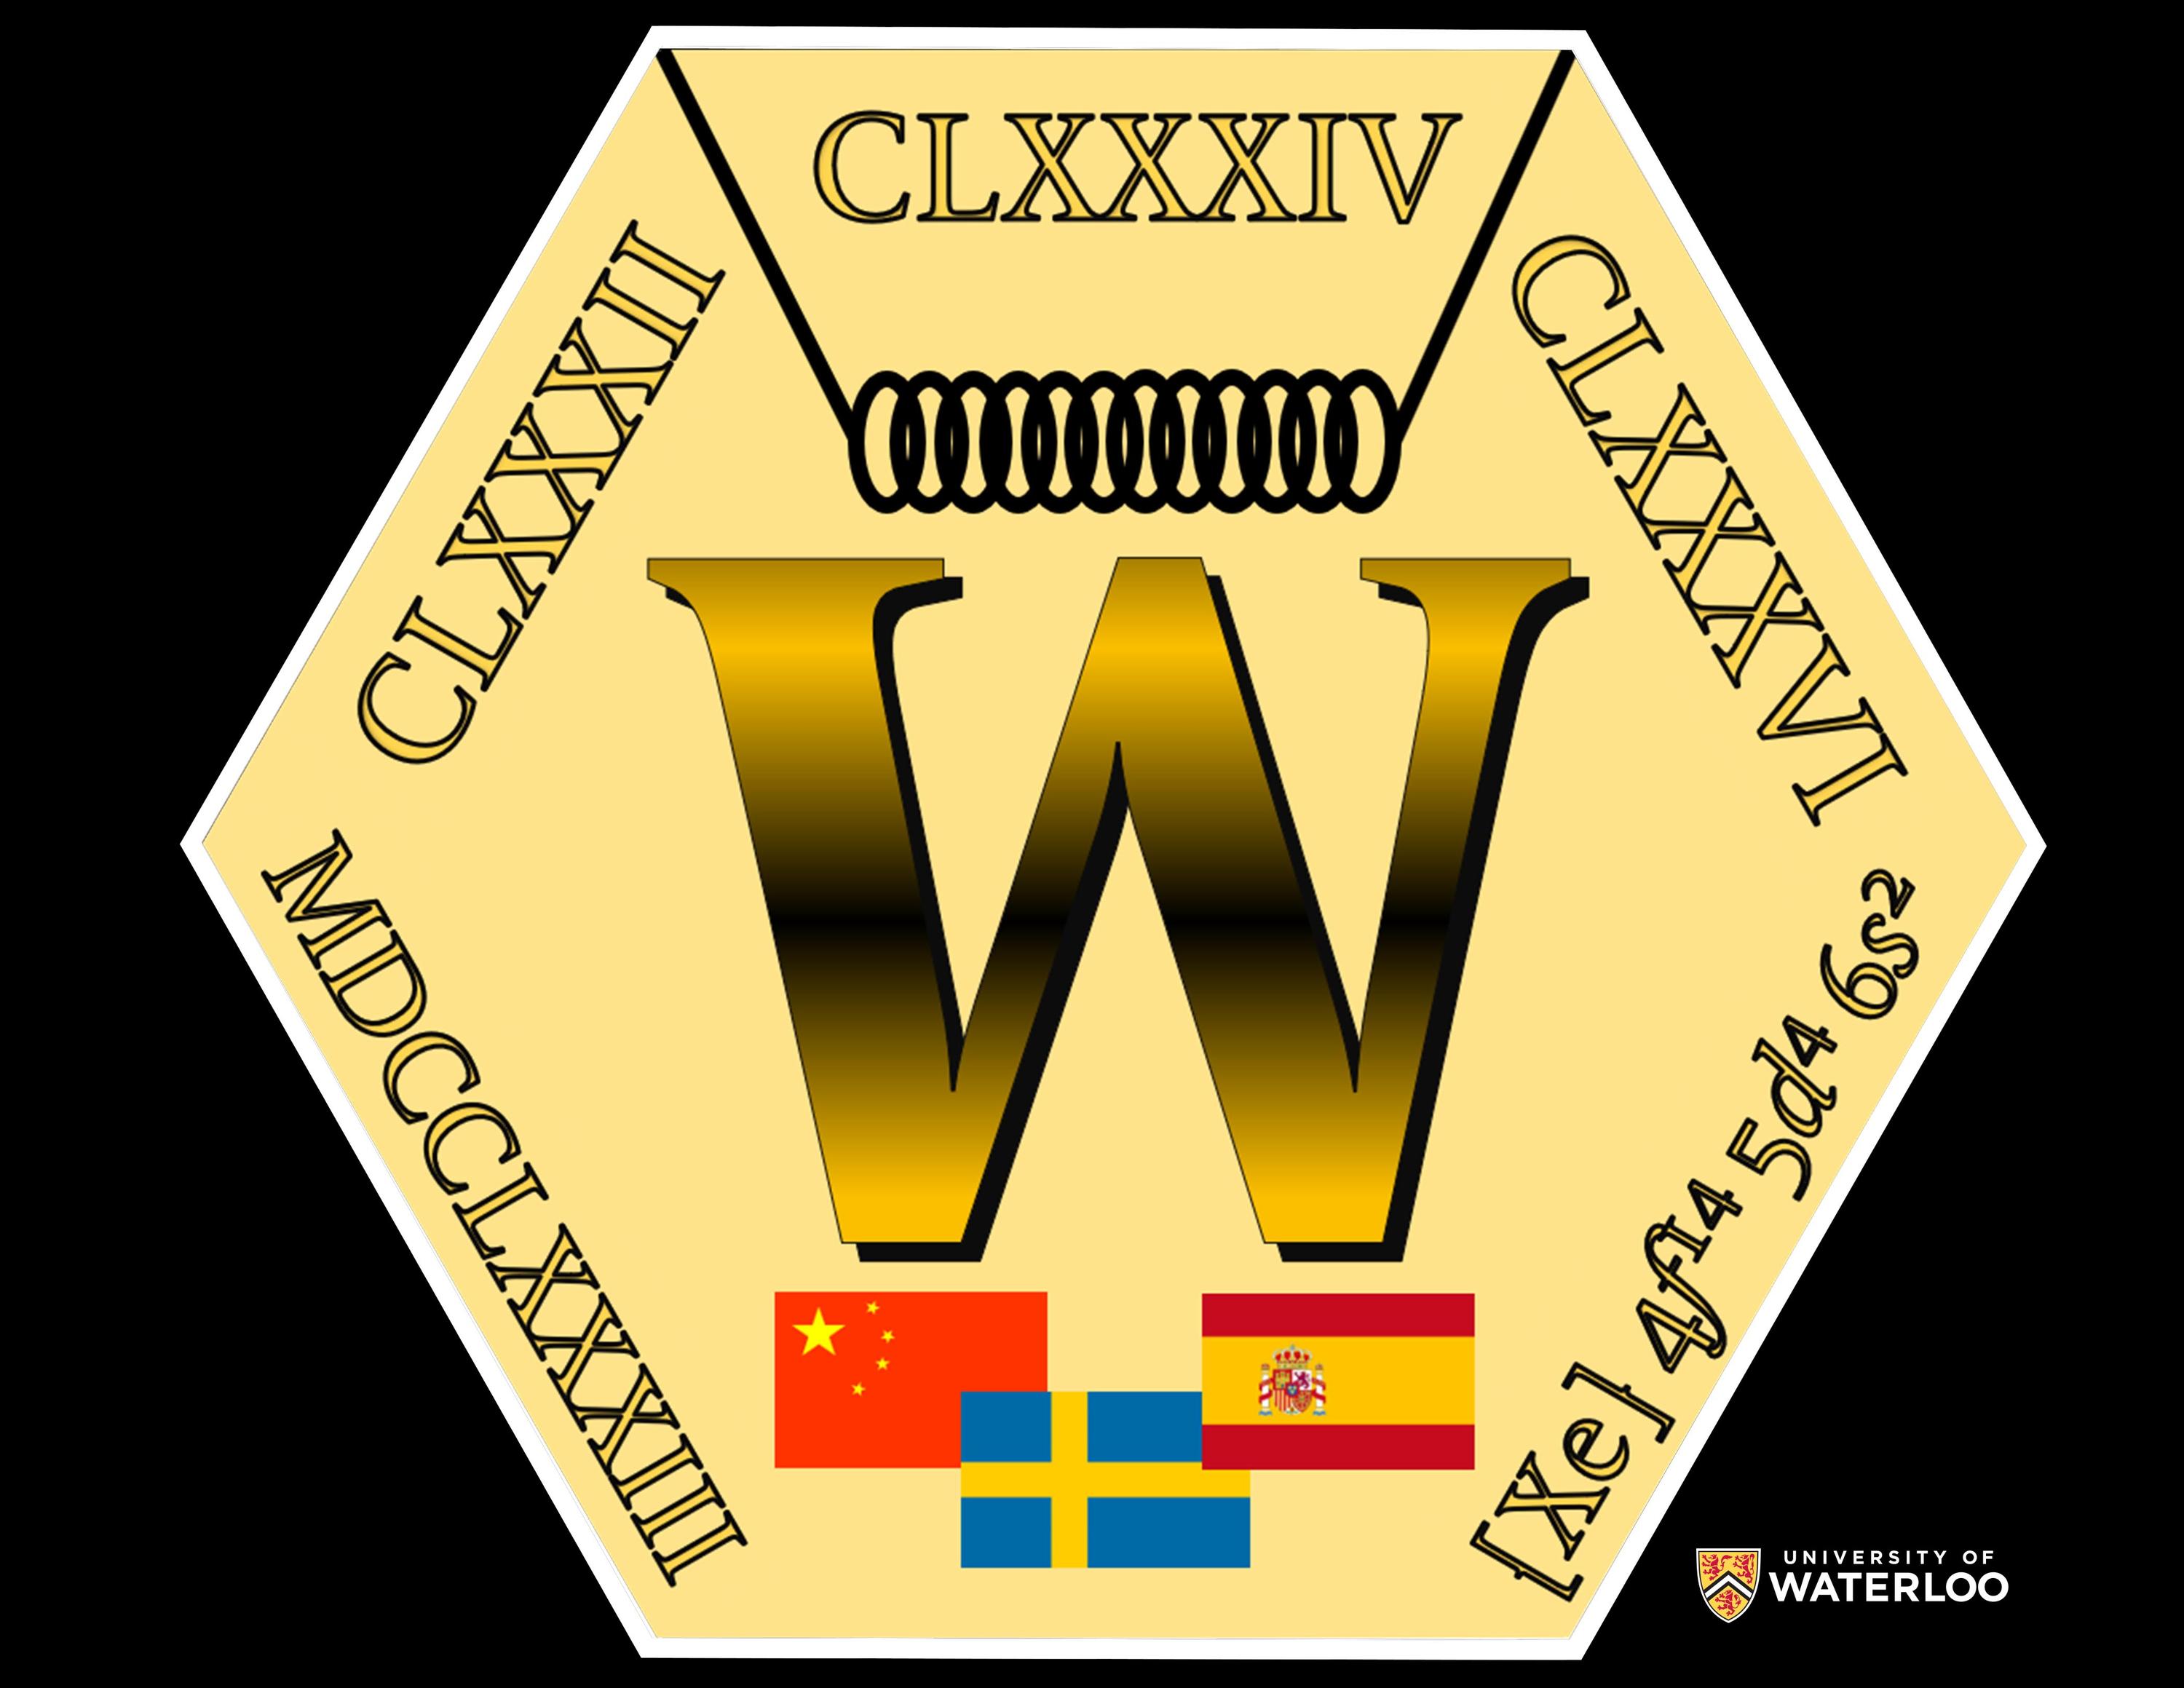 Digital composite on a gold background. A large, gold chemical symbol “W” is centre, above it a tungsten filament as used in a lightbulb. Below are the Chinese, Swedish, and Spanish flags. Around the edges of the tile are Roman letters spelling out “1783” along with three of tungsten’s most abundant isotopes. Lastly, the border includes an equation describing the ground state electron configuration.